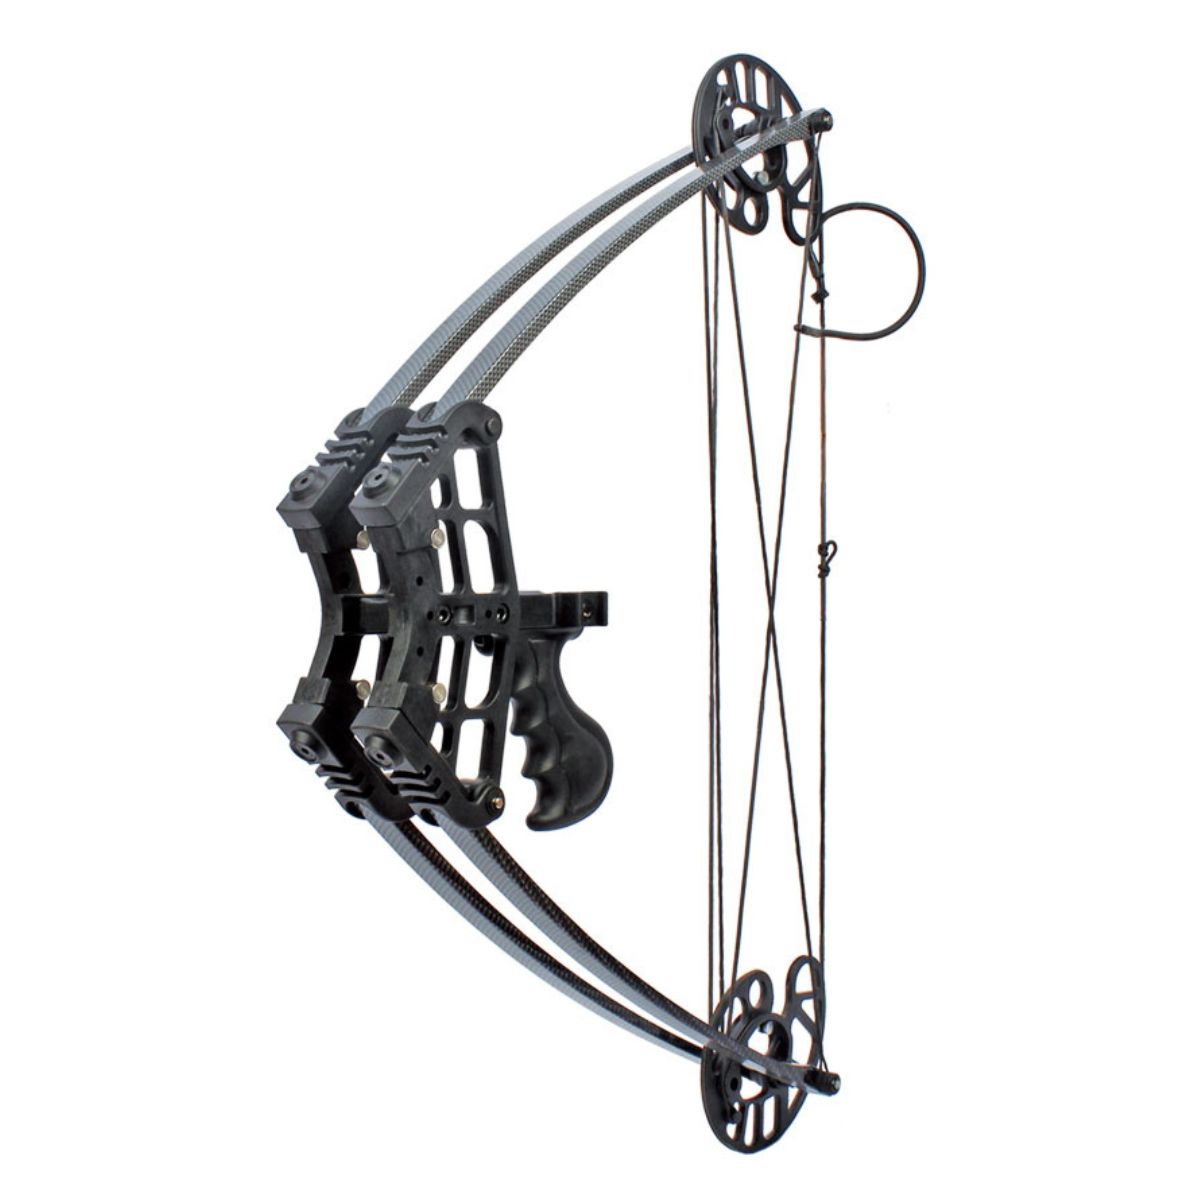 Mean-Triangle Compound Bow - AMT-N109 1